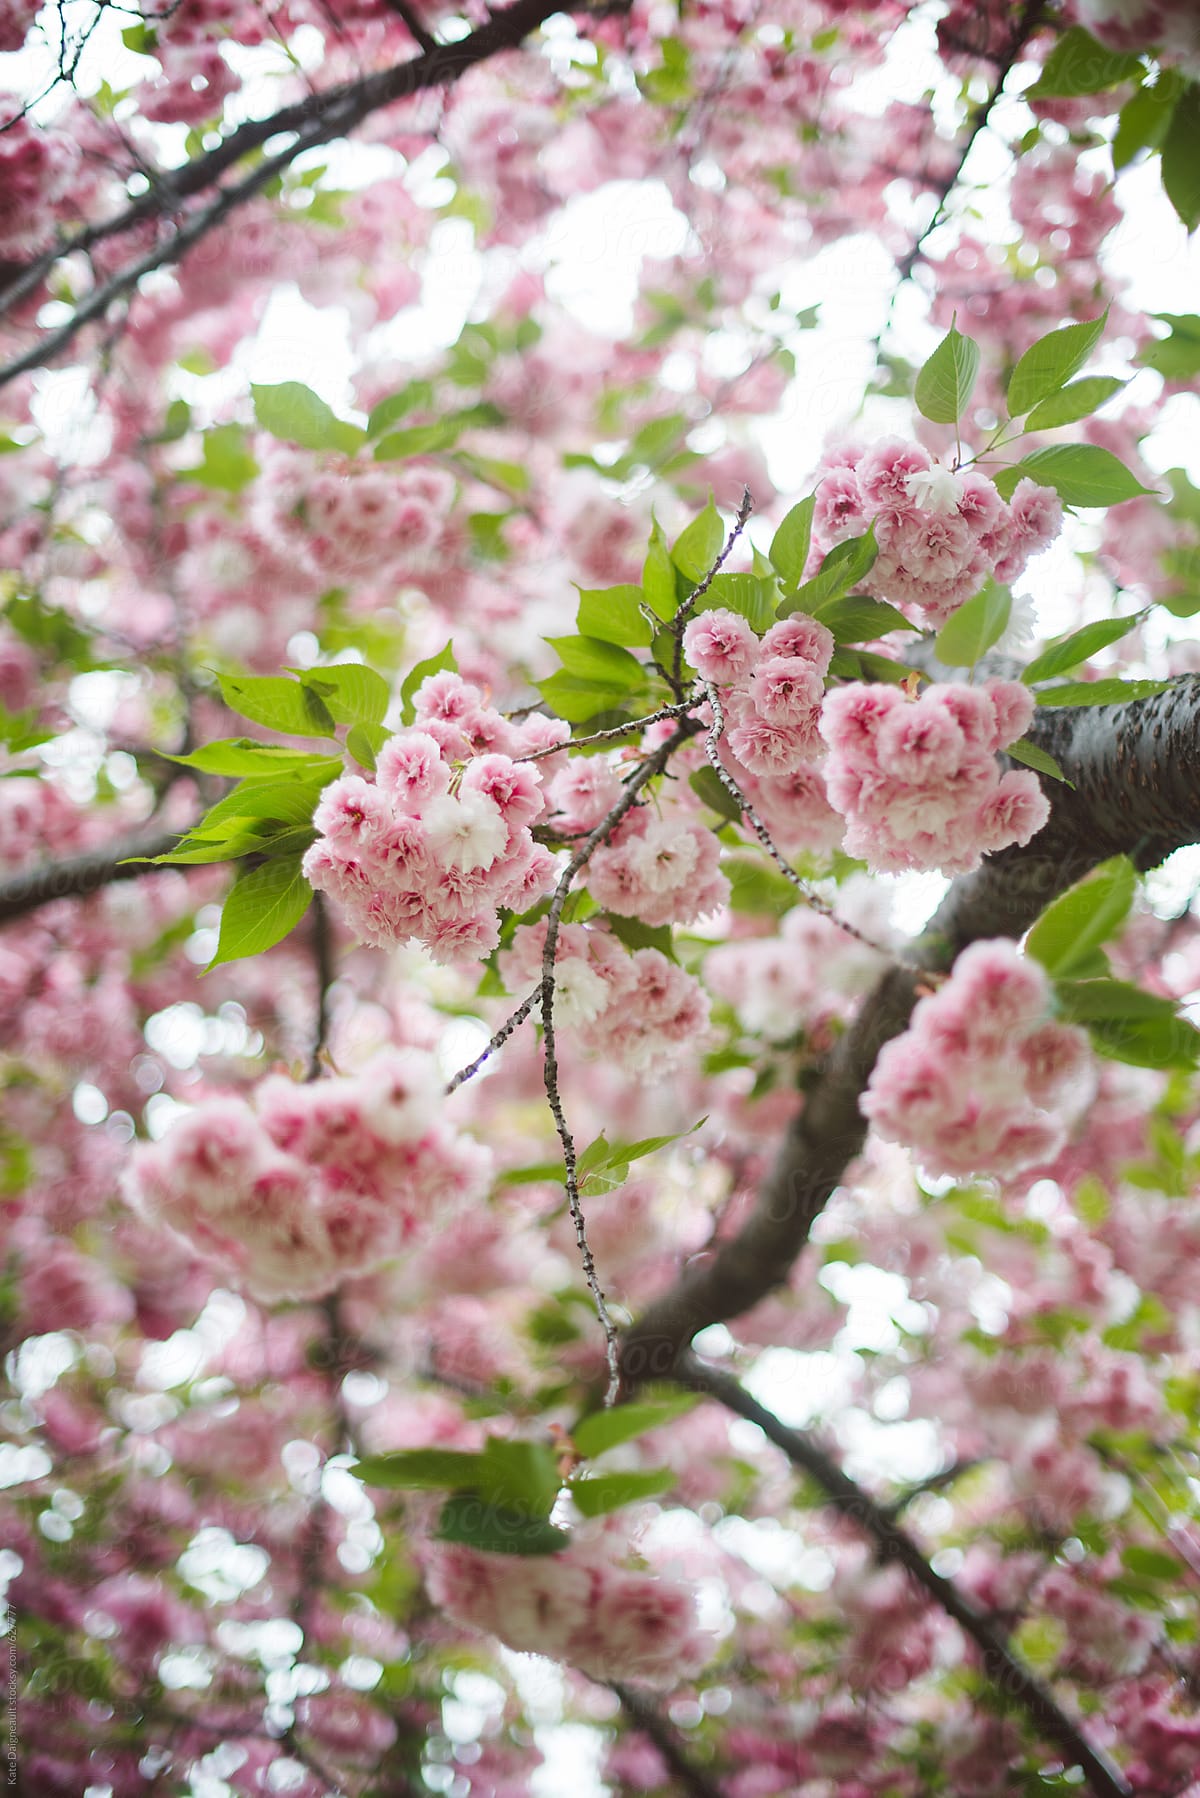 Cherry blossoms bloom for spring at the Brooklyn Botanic Garden